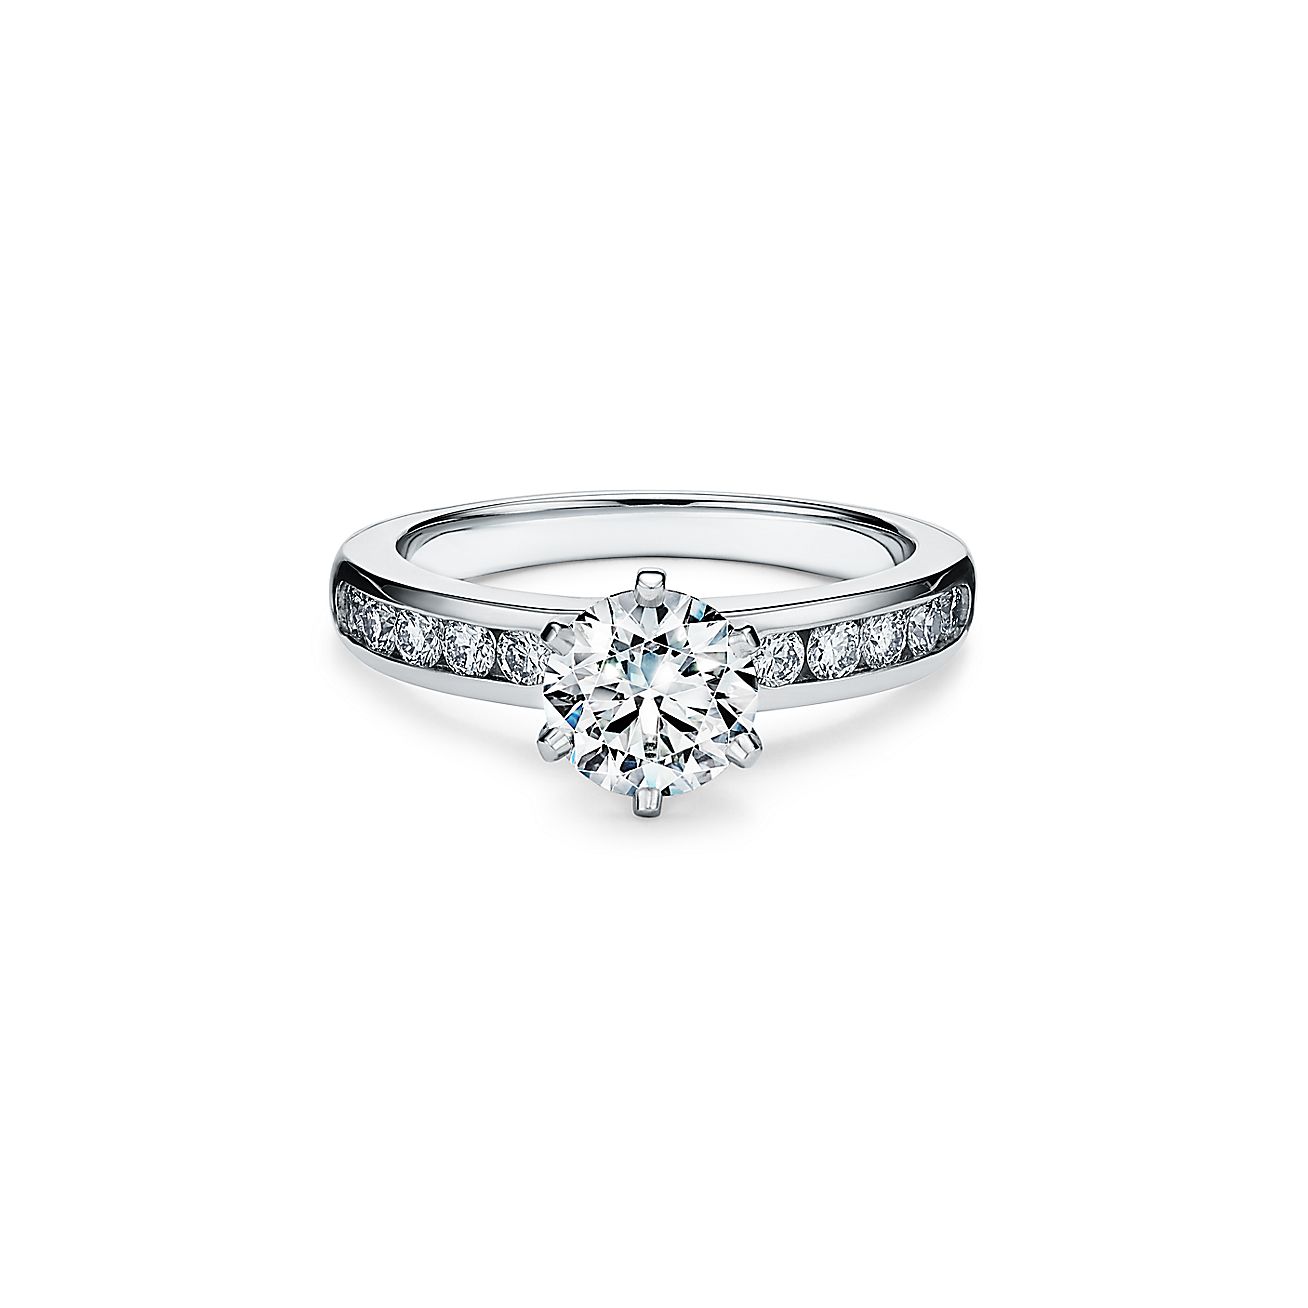 Setting Engagement Ring with a Channel-set Diamond Band 1 carat